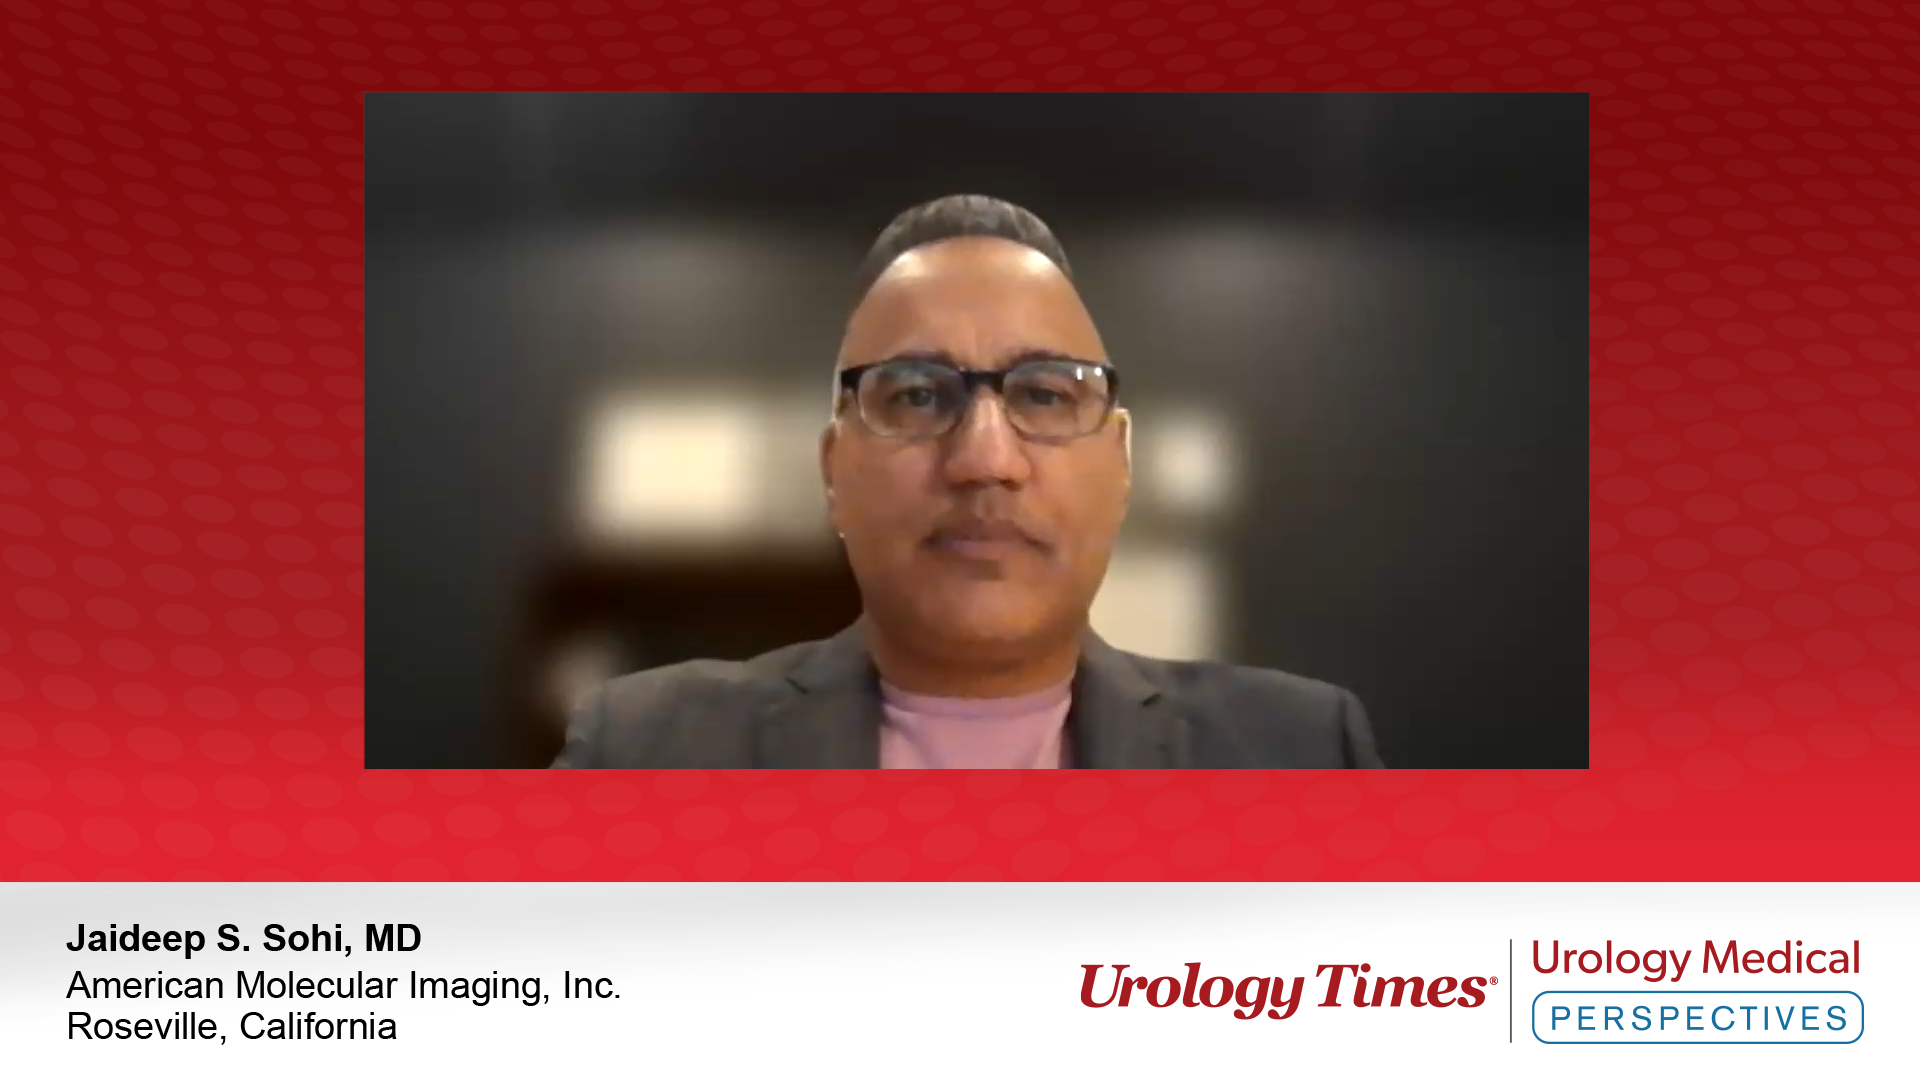 The Impact of PSMA PET/CT Imaging on Managing Prostate Cancer